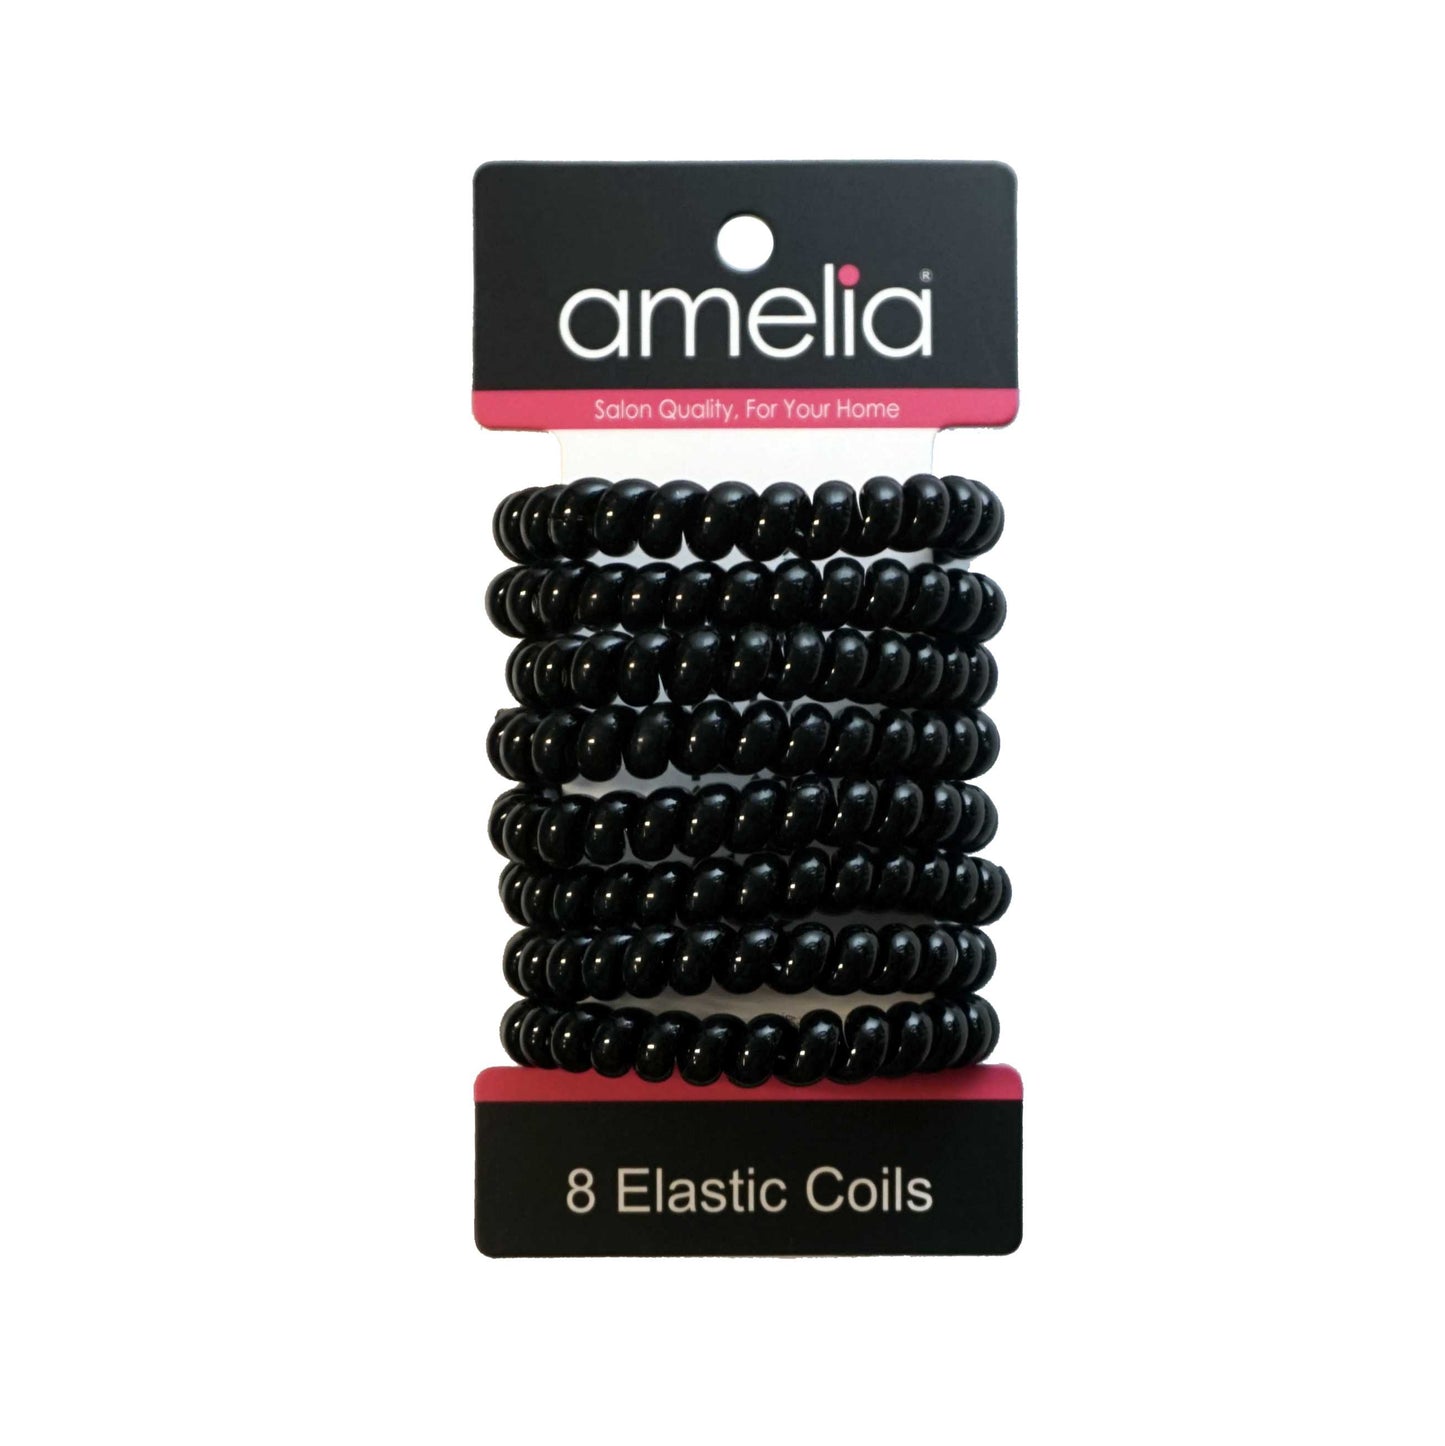 Amelia Beauty Products 8 Large Smooth Elastic Hair Coils, 2. 5in Diameter Thick Spiral Hair Ties, Gentle on Hair, Strong Hold and Minimizes Dents and Creases, Black